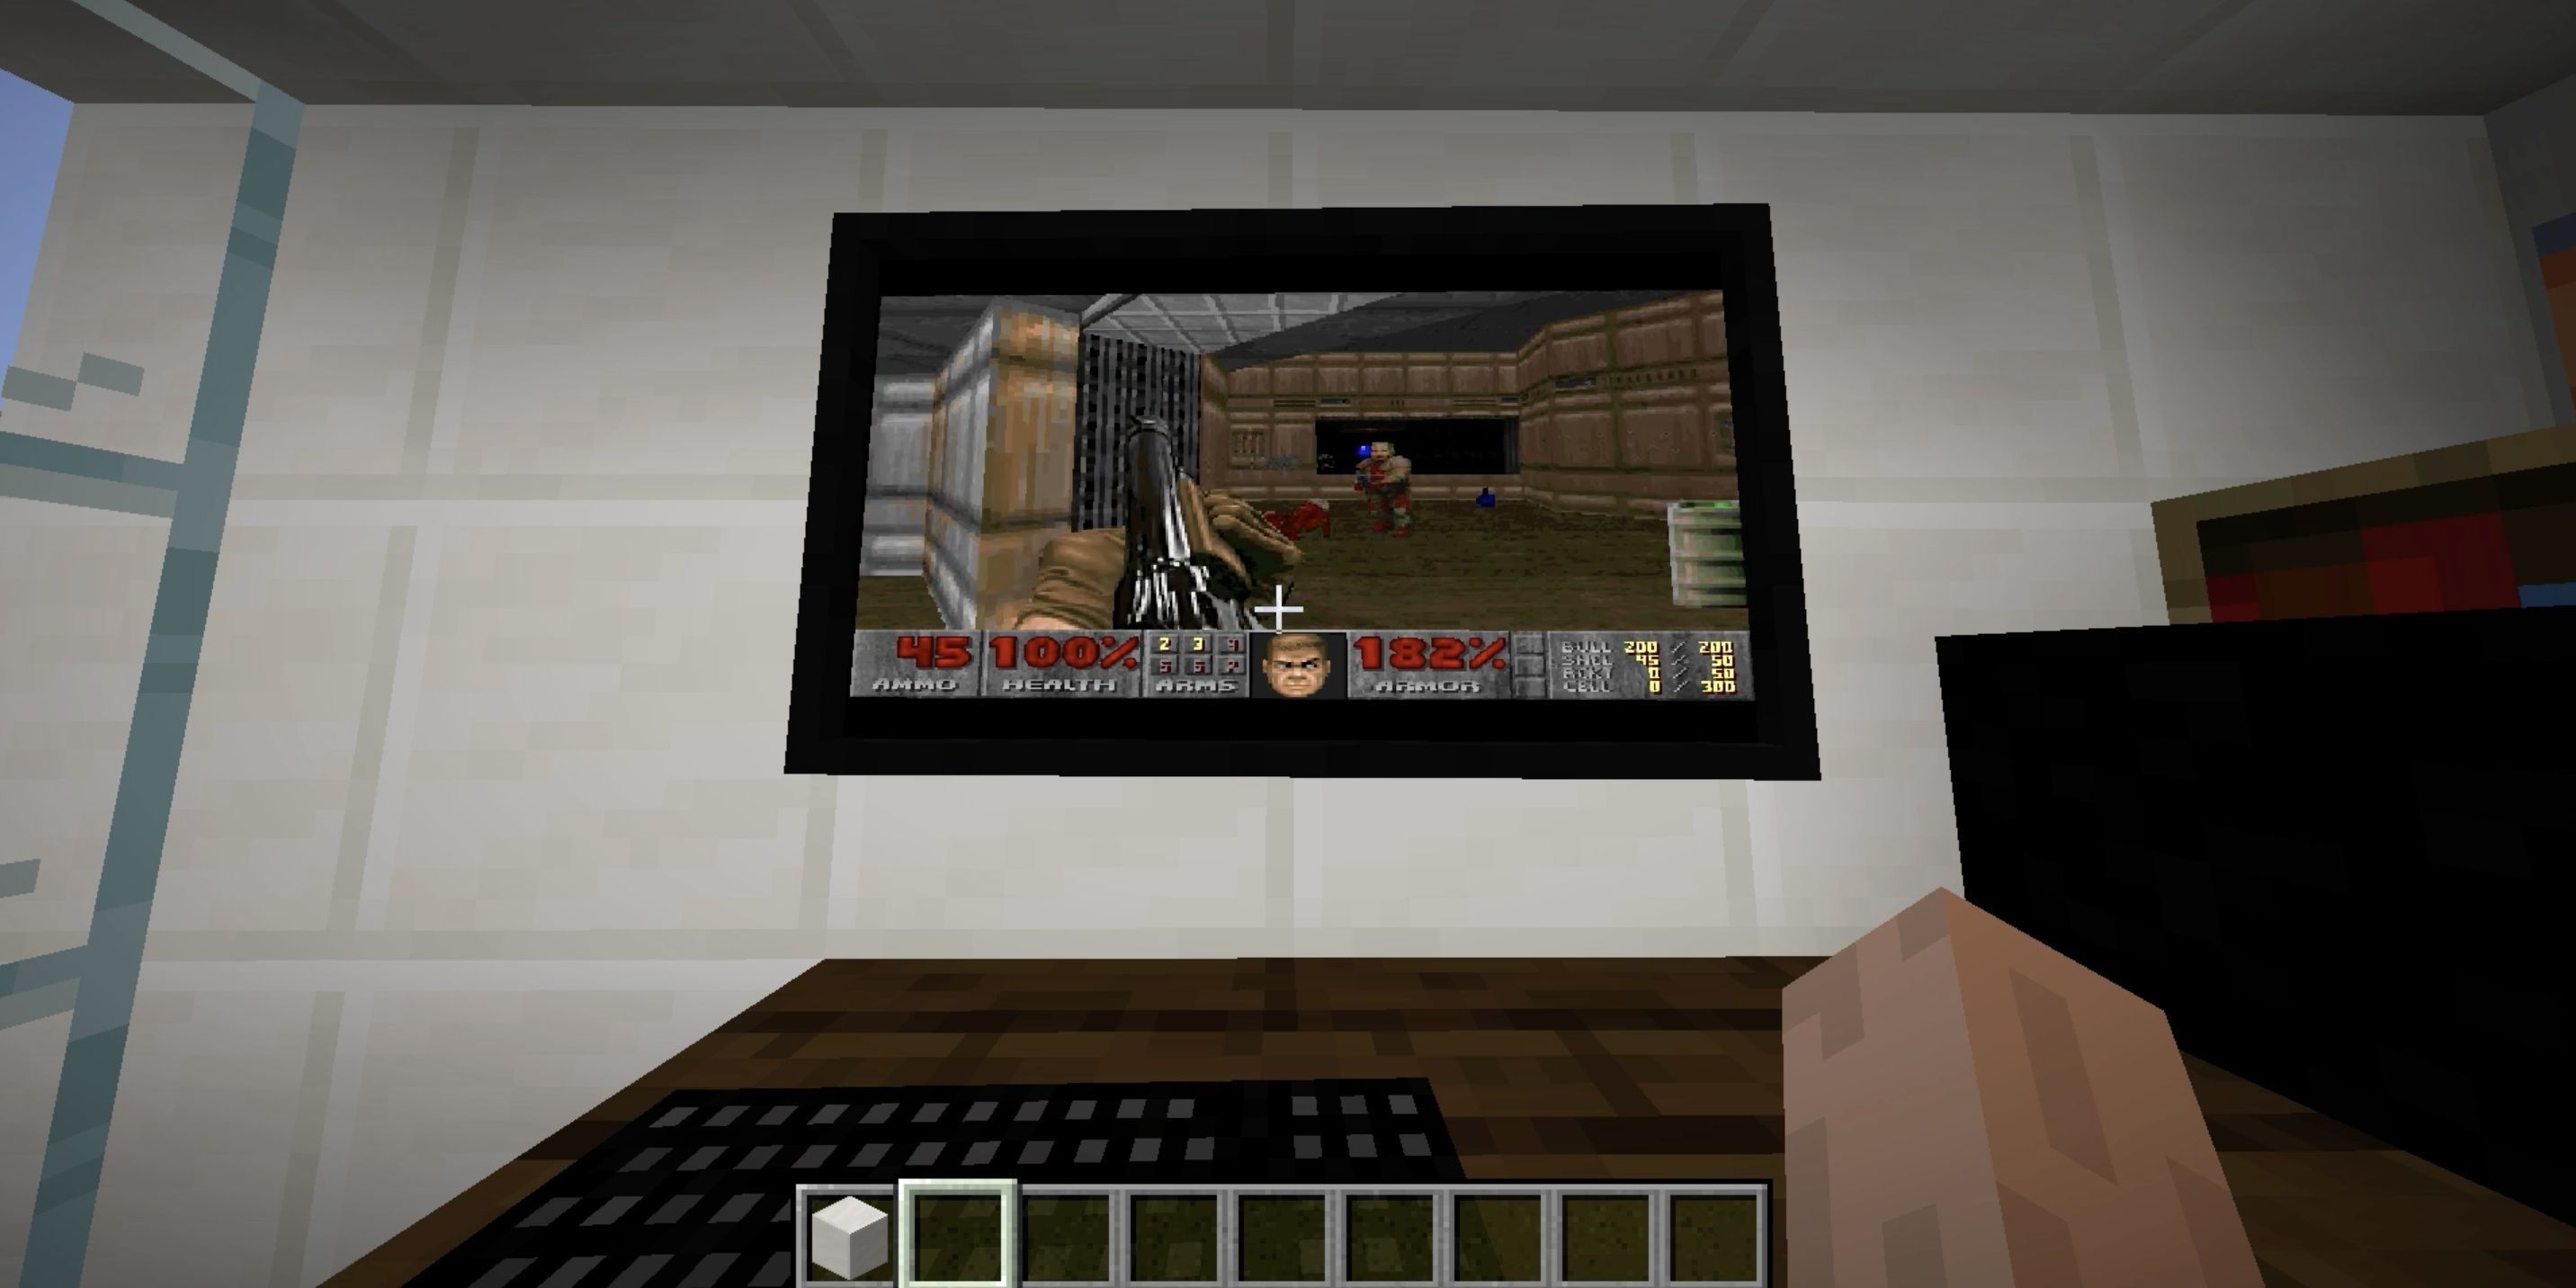 A PC playing Doom in Minecraft